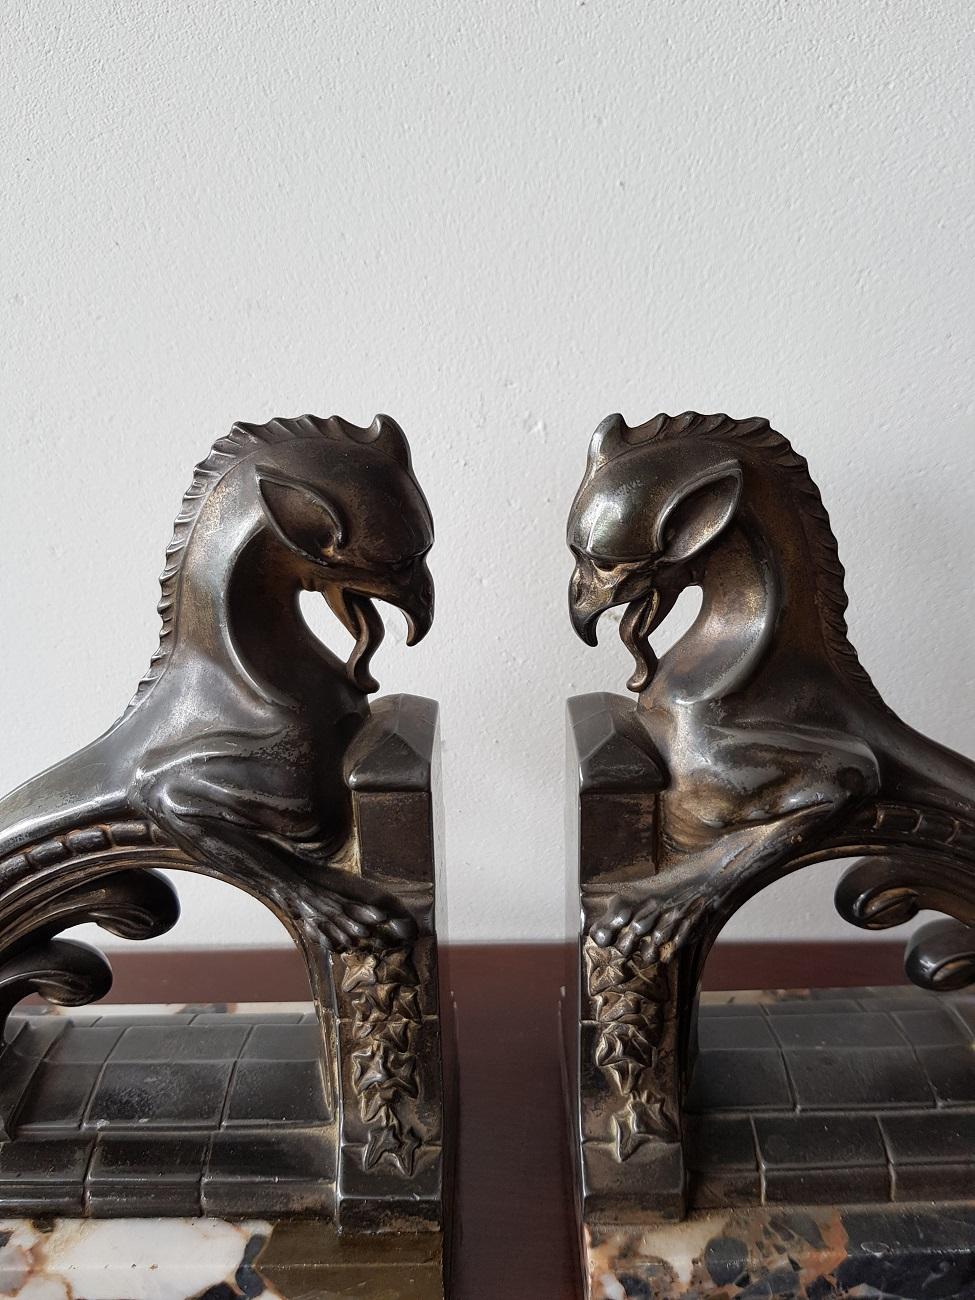 Set of two fabulous French Art Deco bookends depicting mythical creatures on marble base and both have an old silverplated patina, circa 1930.

The measurements are,
Depth 8 cm/ 3.1 inch.
Width 15 cm/ 5.9 inch.
Height 17 cm/ 6.6 inch.
 